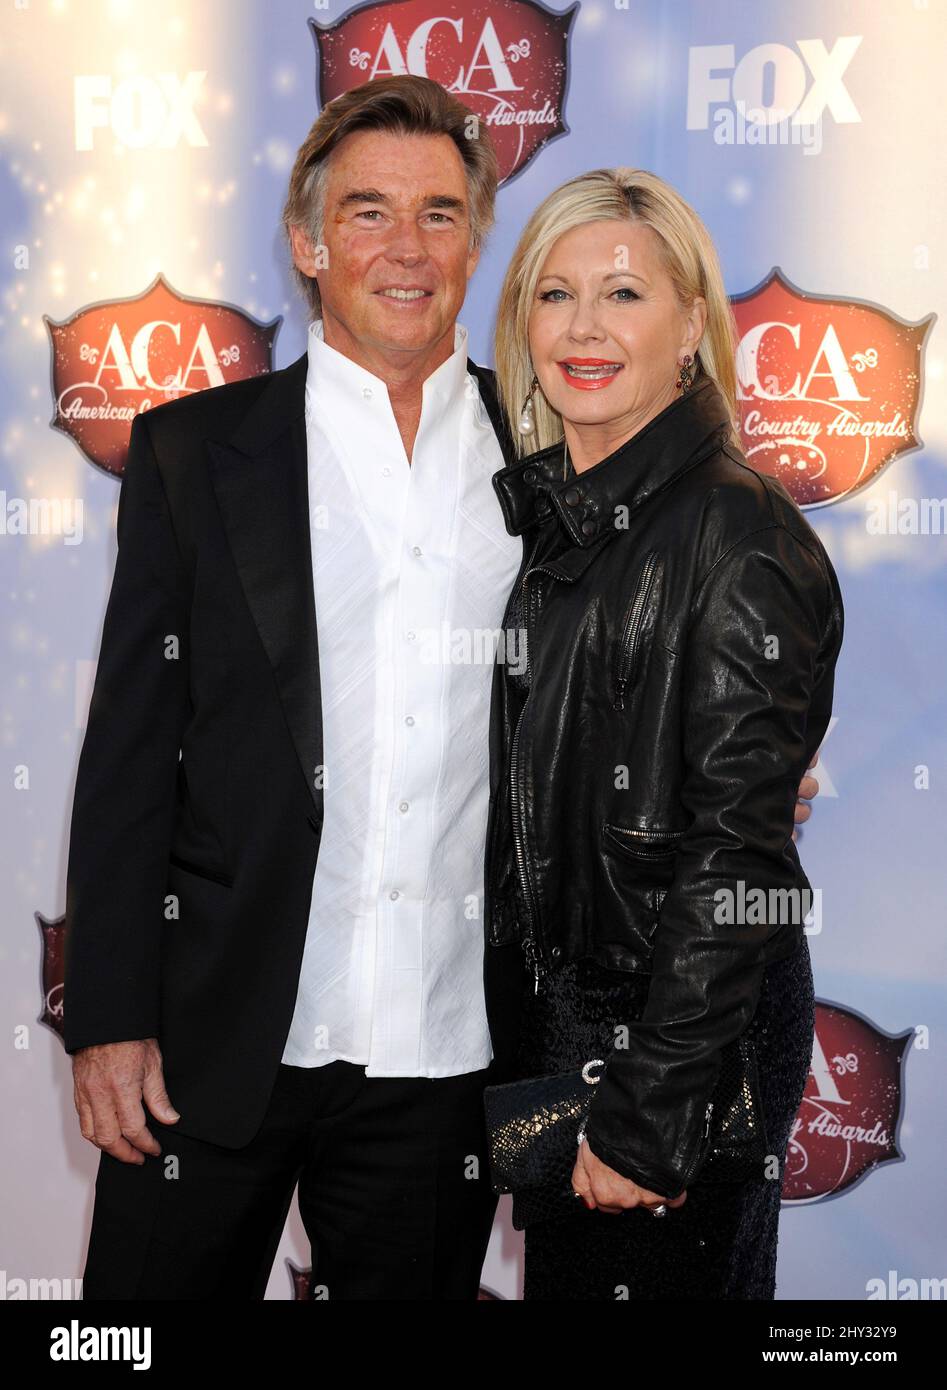 Olivia Newton-John and John Easterling attending the American Country Awards 2013 held at the Mandalay Bay Events Center in Las Vegas, Nevada. Stock Photo